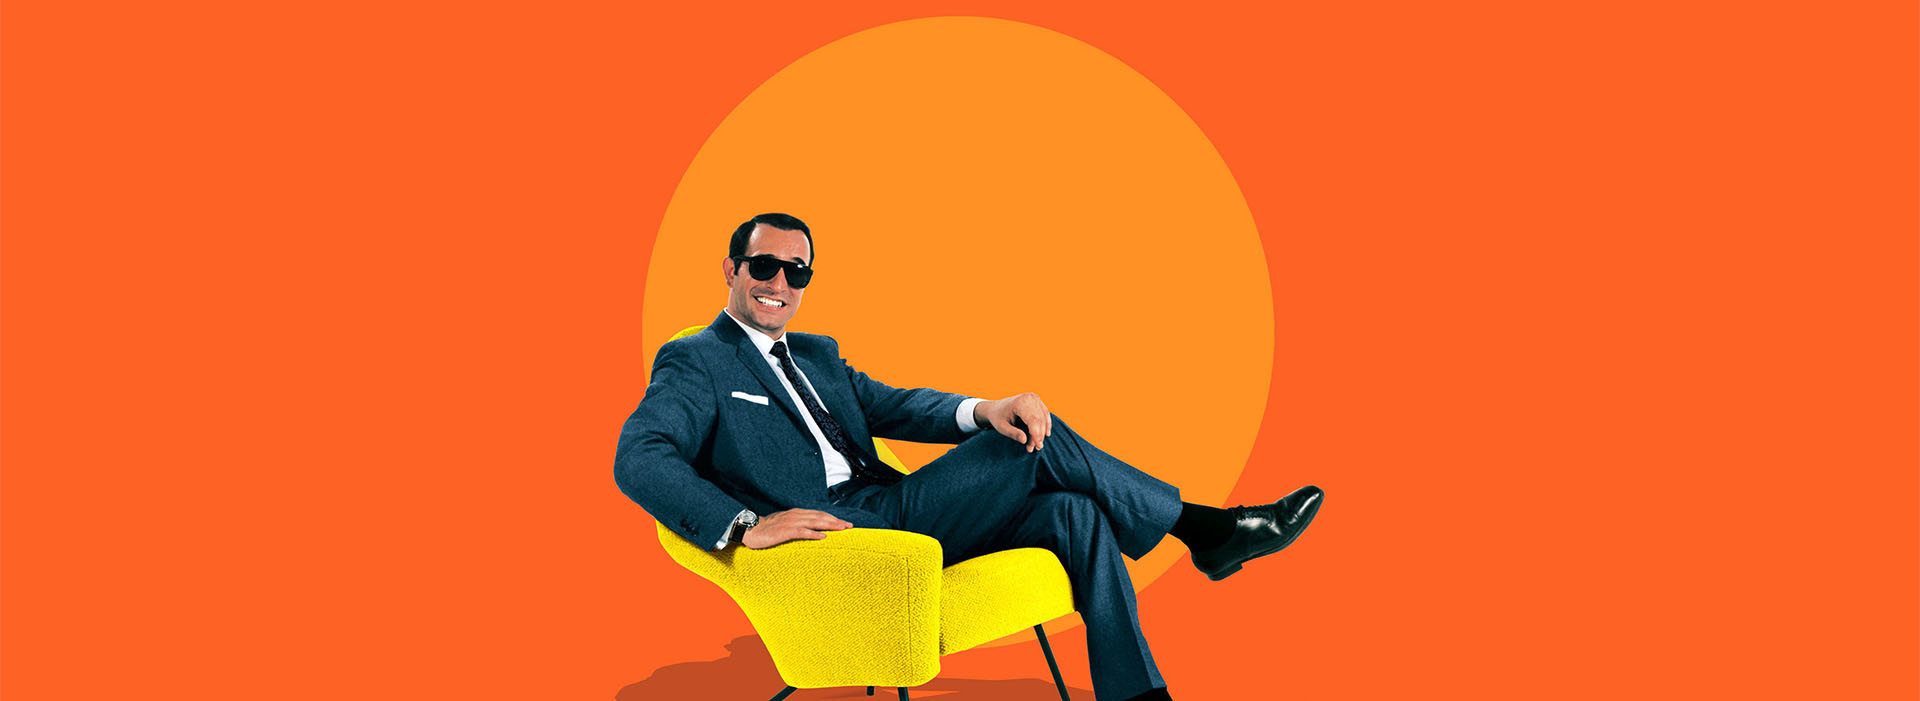 Movie poster OSS 117: Cairo, Nest of Spies